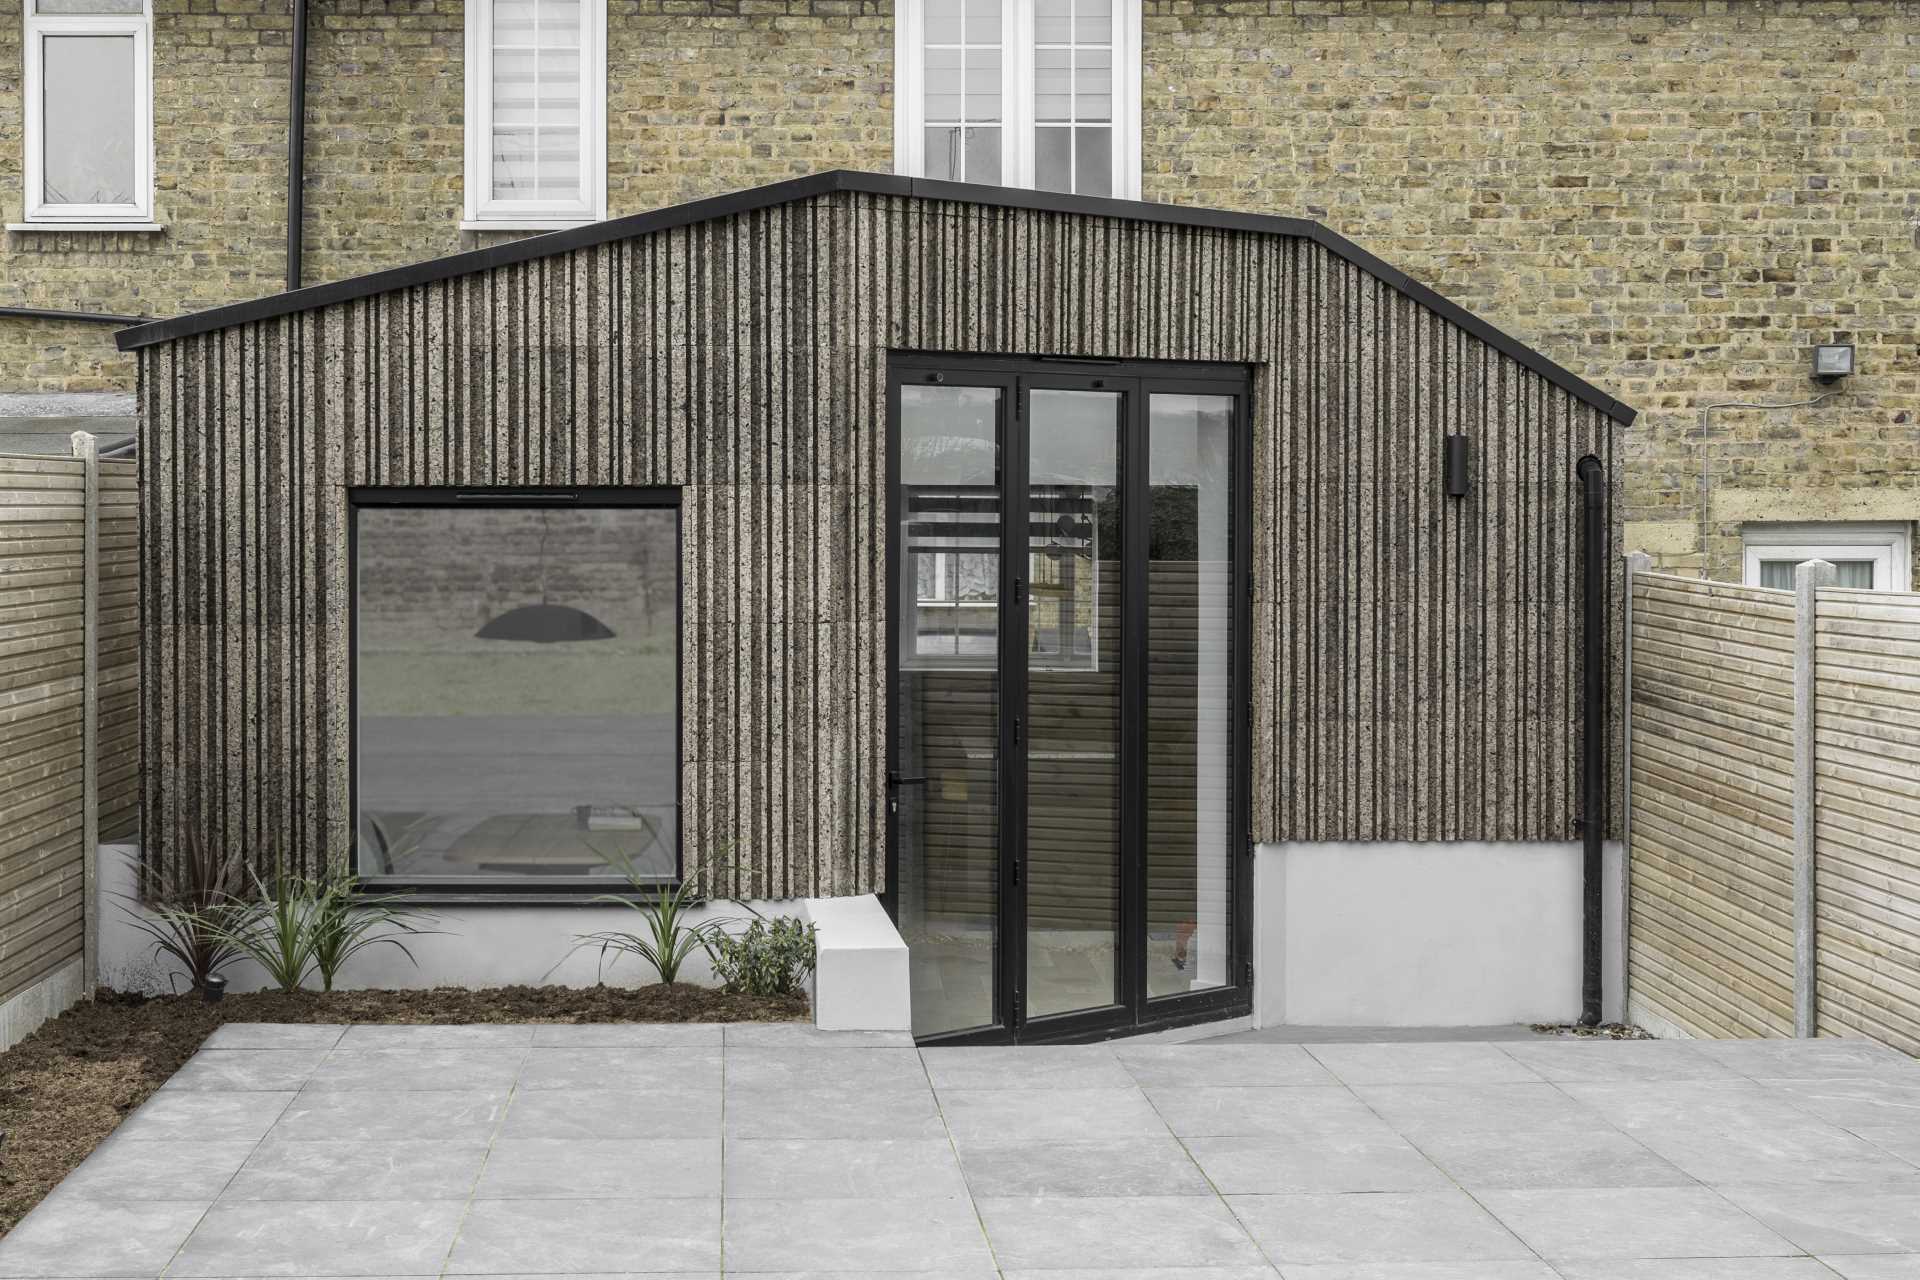 A modern home extension that's clad in patterned cork, and includes black window and door frames.